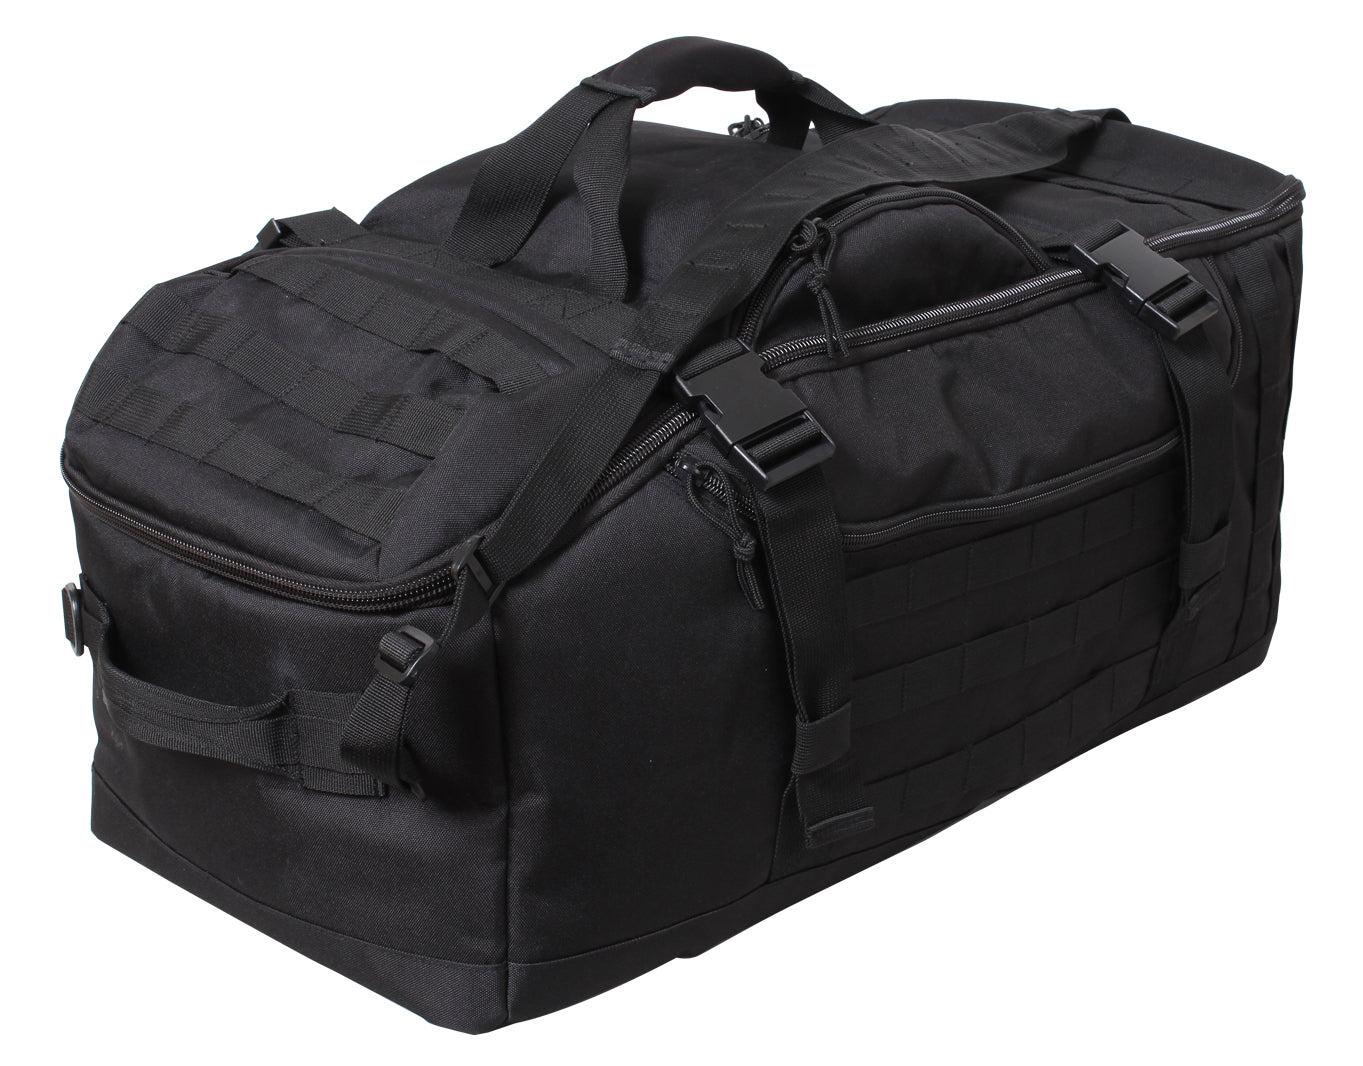 Rothco 3-In-1 Convertible Mission Bag